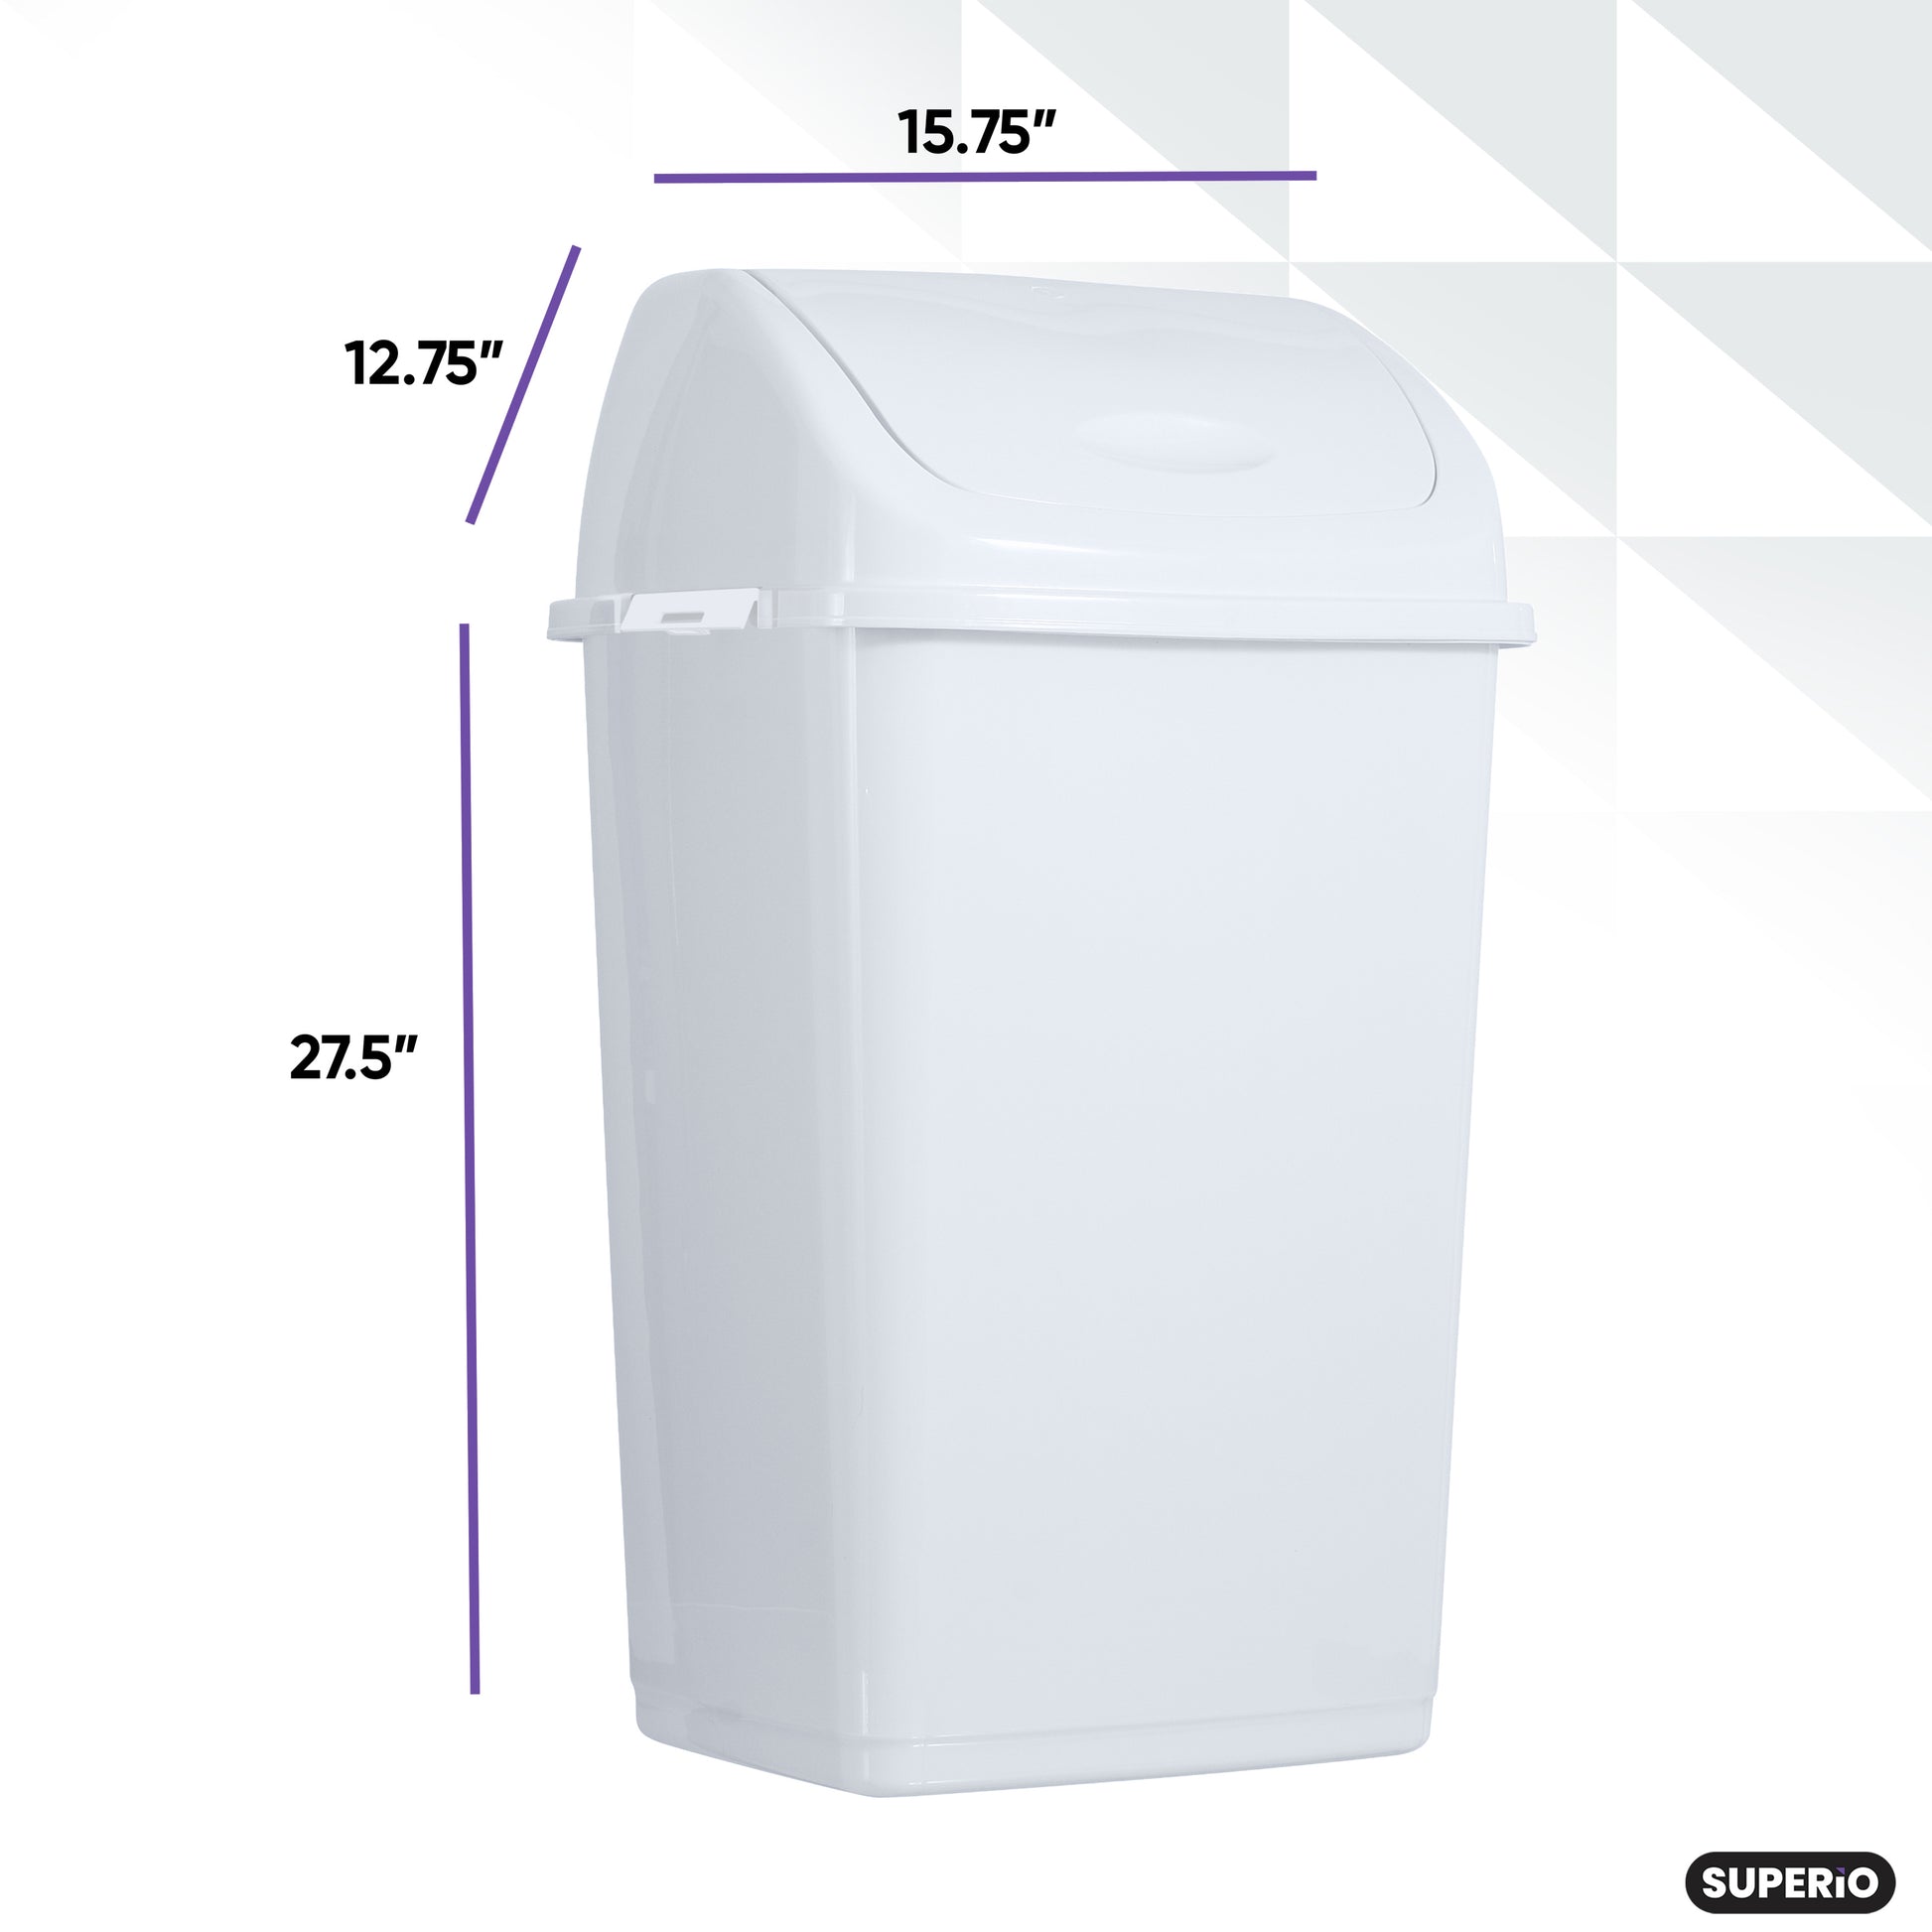 Kitchen Trash Can 13 Gallon with Swing Lid, Plastic Tall Garbage Can Outdoor and Indoor, Large 52 qt Recycle Bin and Waste Basket for Home, Office